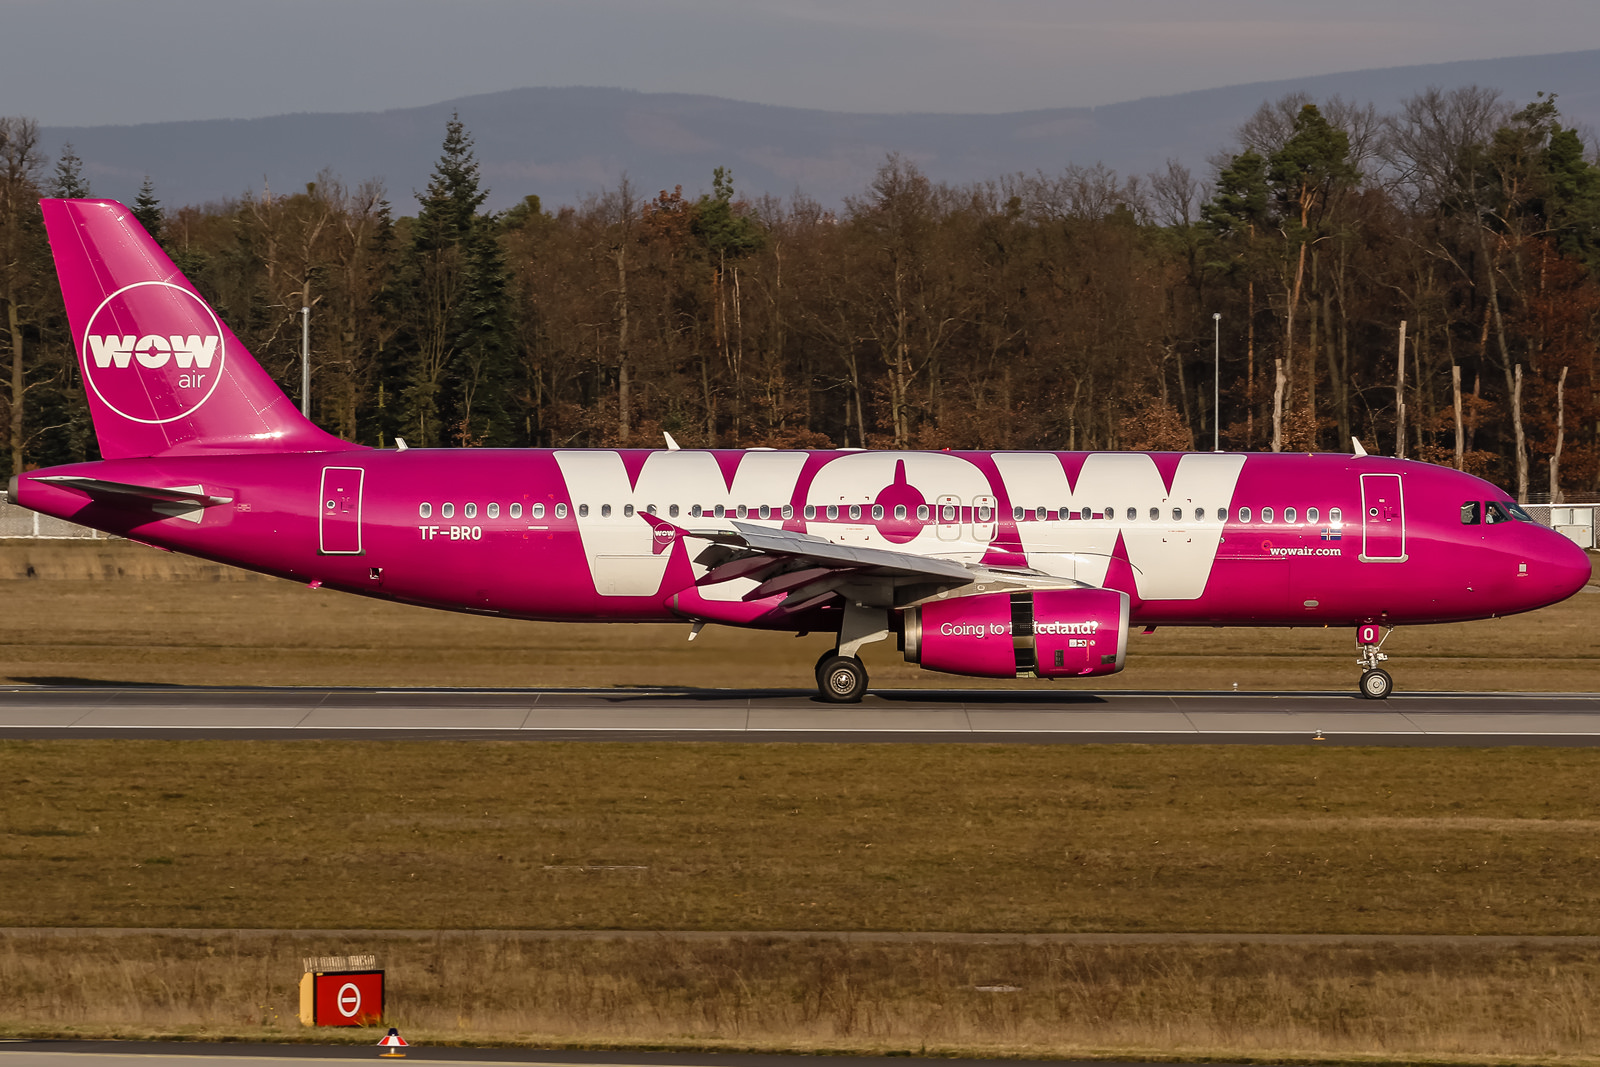 Dallas The Latest City To Get Cheap Flights To Europe With WOW Air Expansion - Pizza In Motion